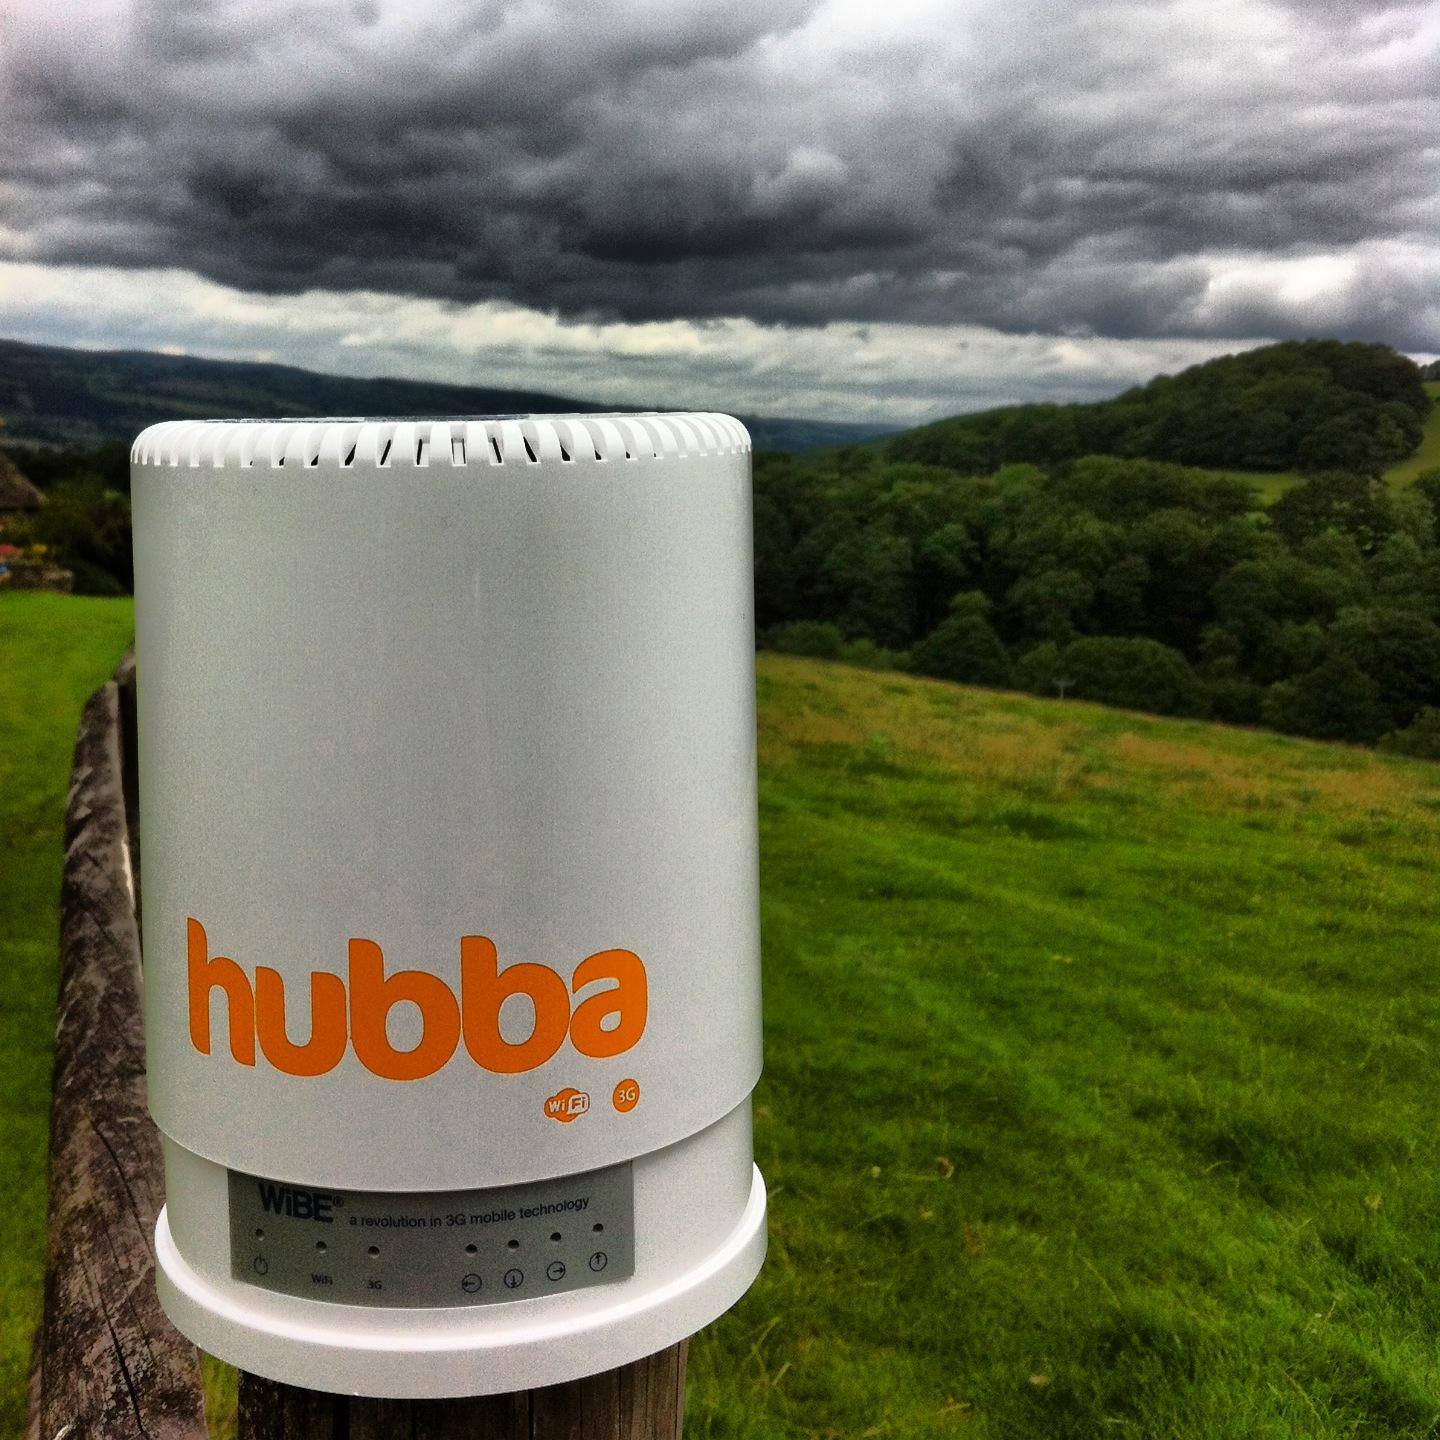 Hubba 3G WIFI Router